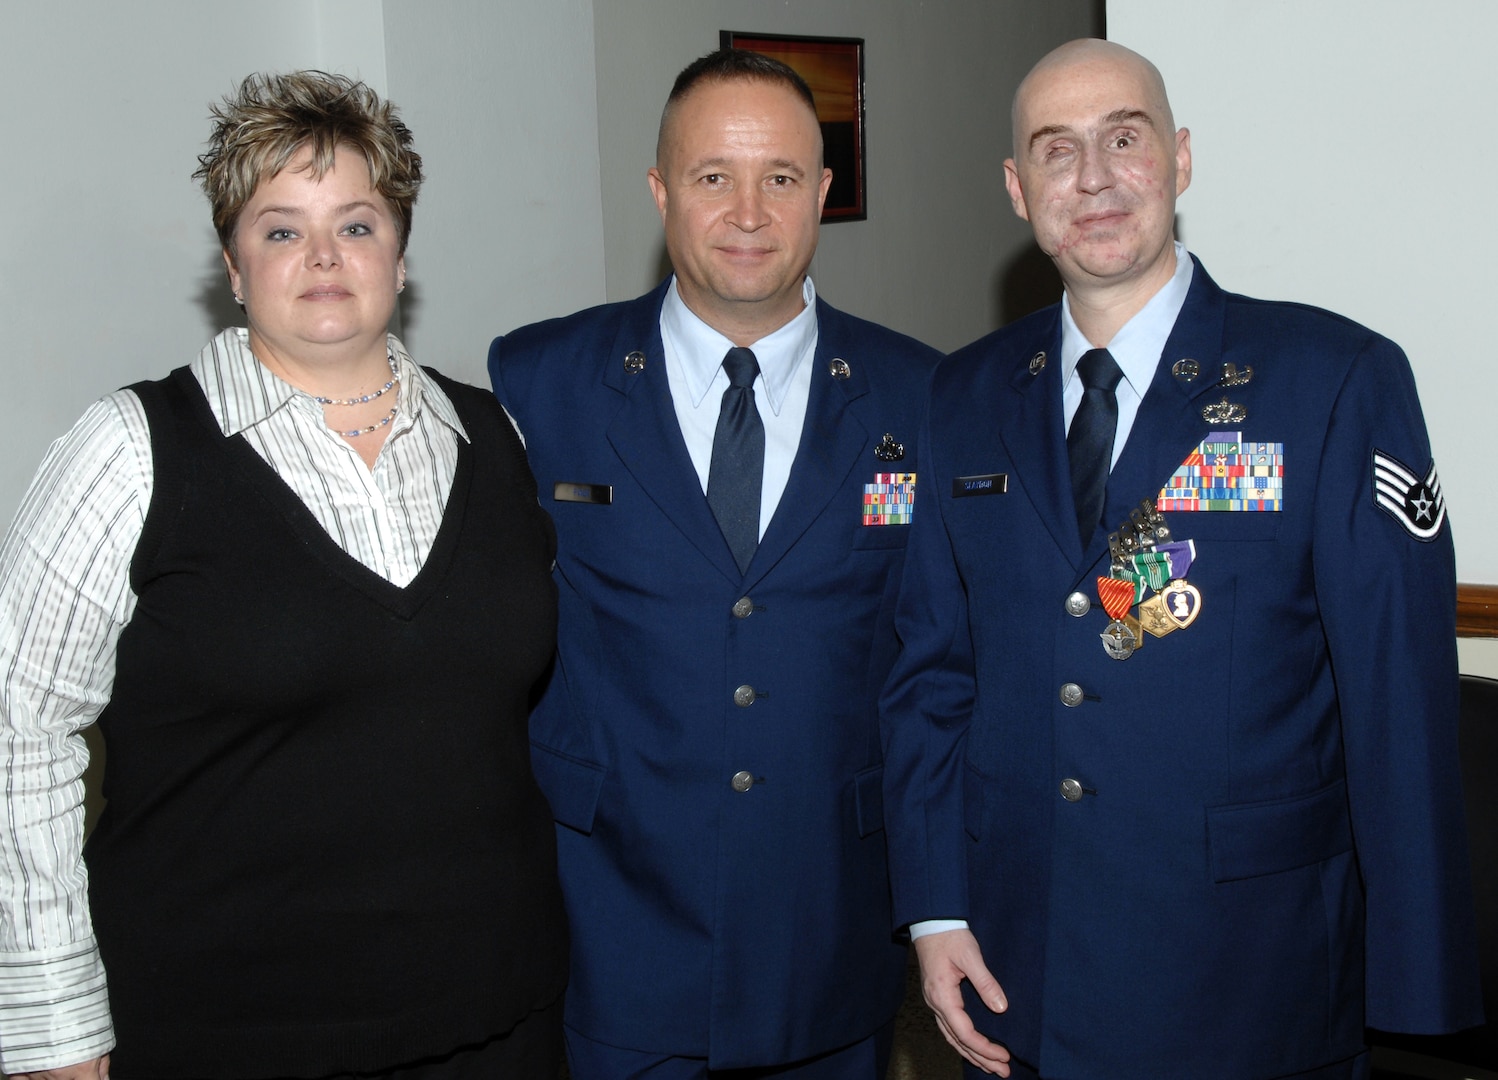 Sergeant Slaydon's wife, Annette, Chief Master Sgt. Stephen Page, 12th Flying Training Wing command chief, and Staff Sgt. Matthew Slaydon pose for a photo at Sergeant Slaydon's Purple Heart Ceremony January 29 at the base theater.